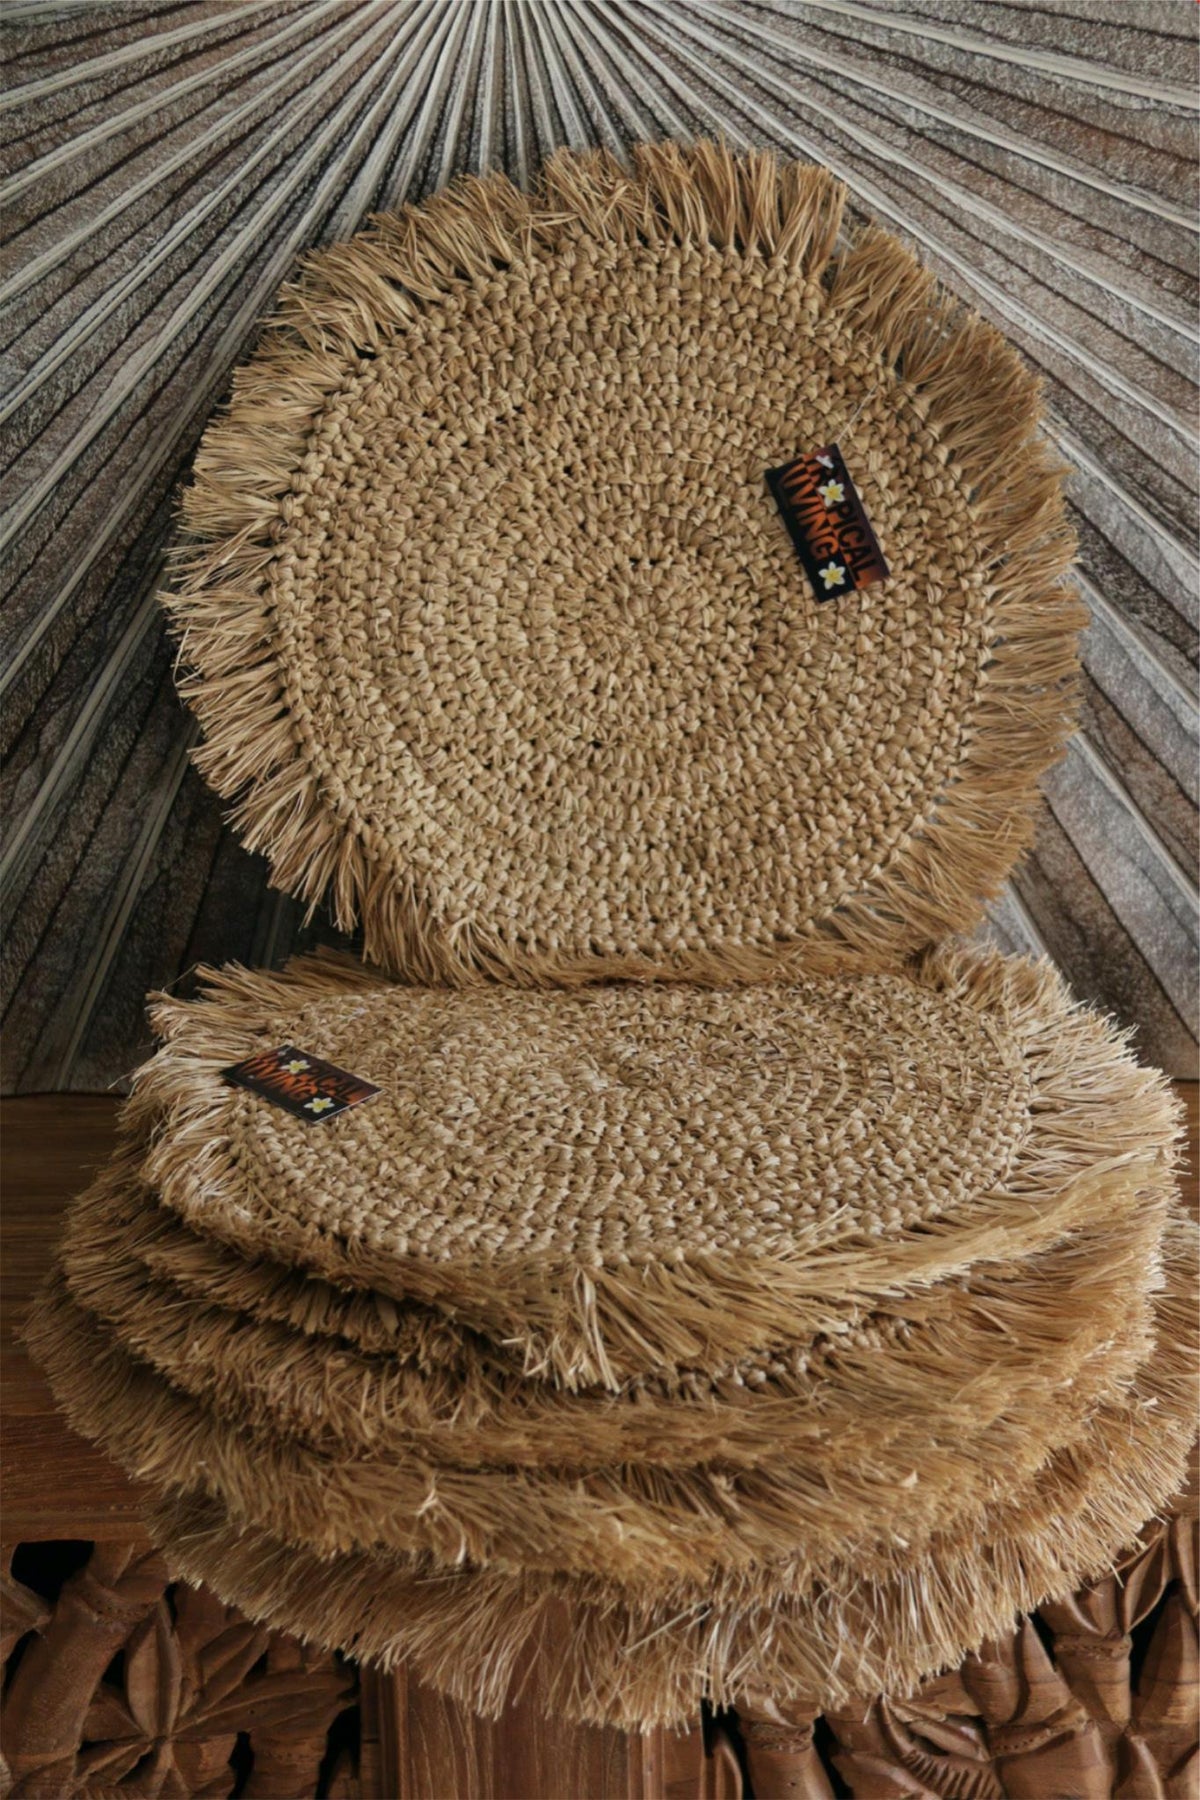 NEW Bali Table Mat / Placemat - Balinese Palm Rope/Raffia Placemats / Table Mats